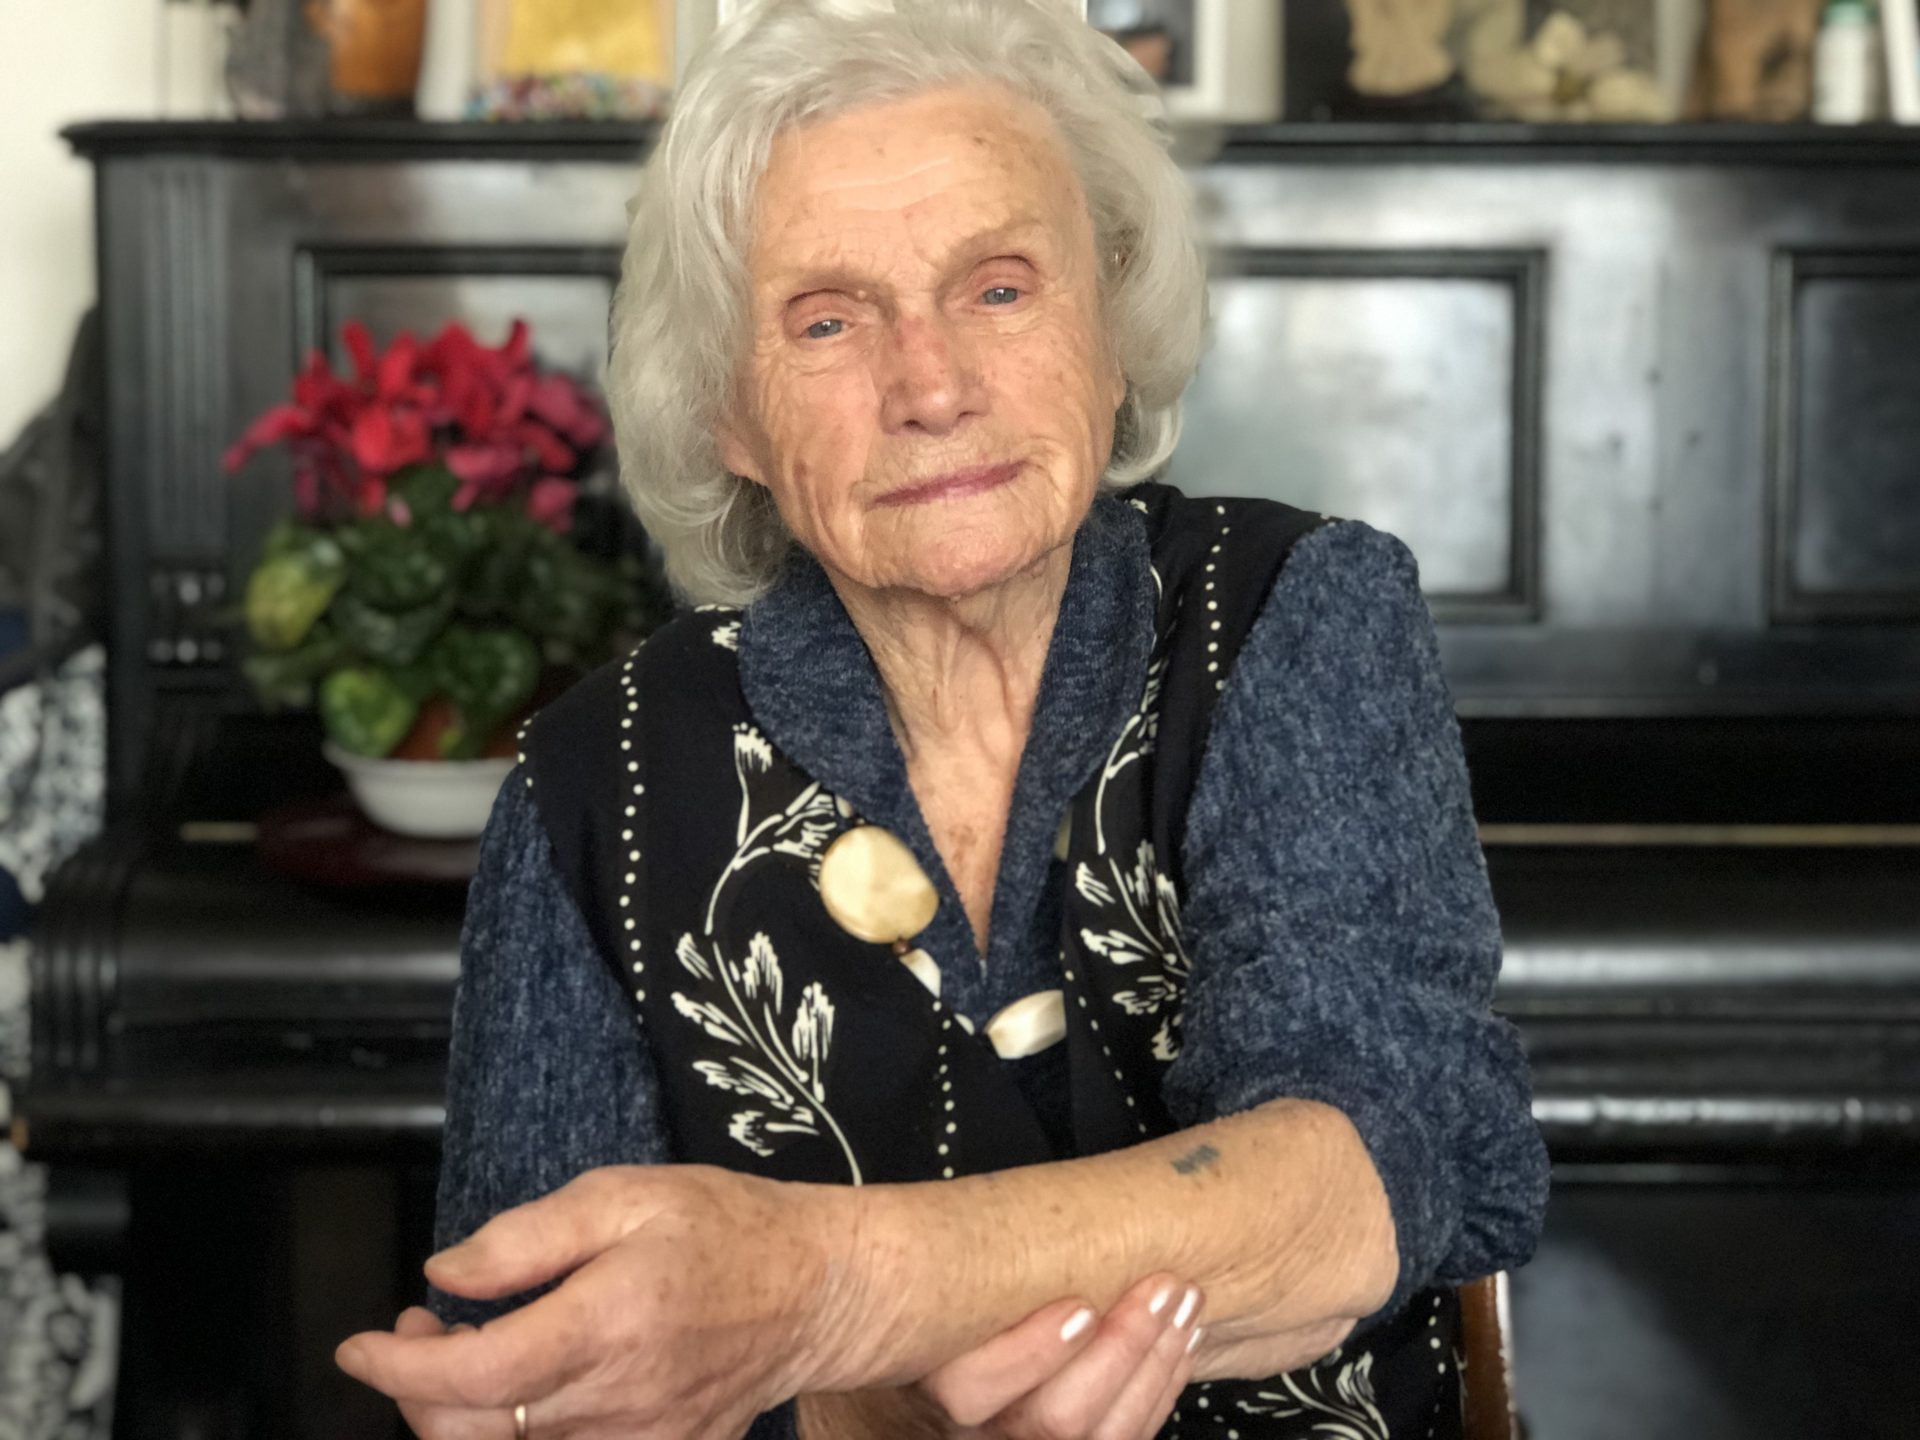 Auschwitz survivor Alina Dabrowska, 96, shows her Auschwitz prisoner number tattoo at her home in Warsaw. She was sent to Auschwitz after she was caught by the Nazis helping the allied forces in German-occupied Poland during World War II.